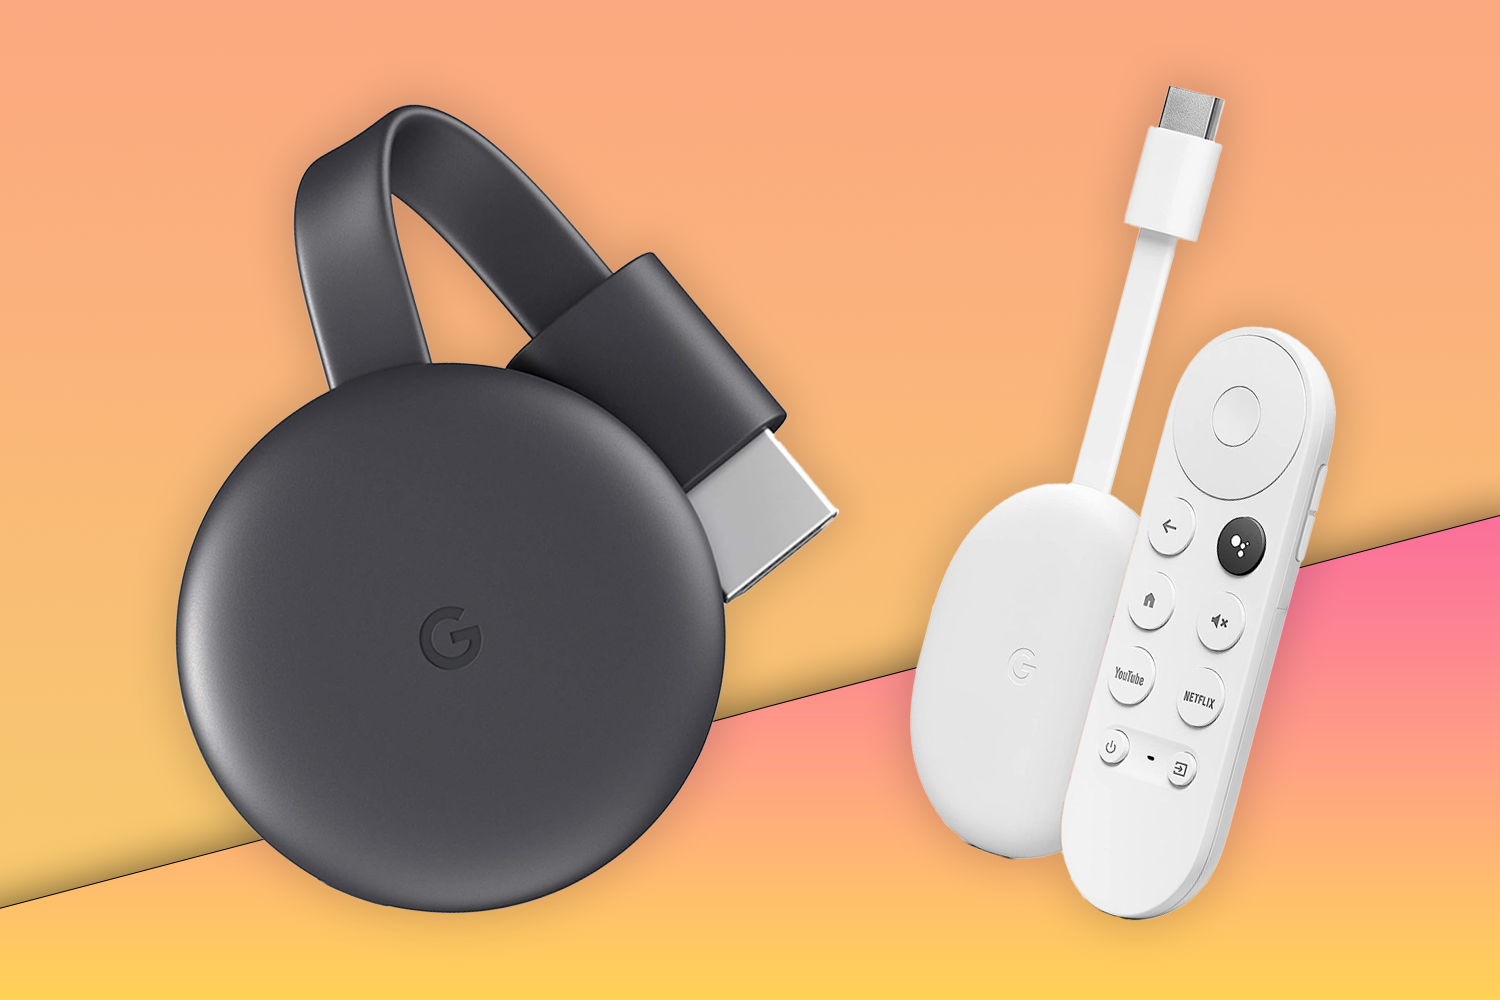 What is Google Chromecast, and how does it work? | Stuff